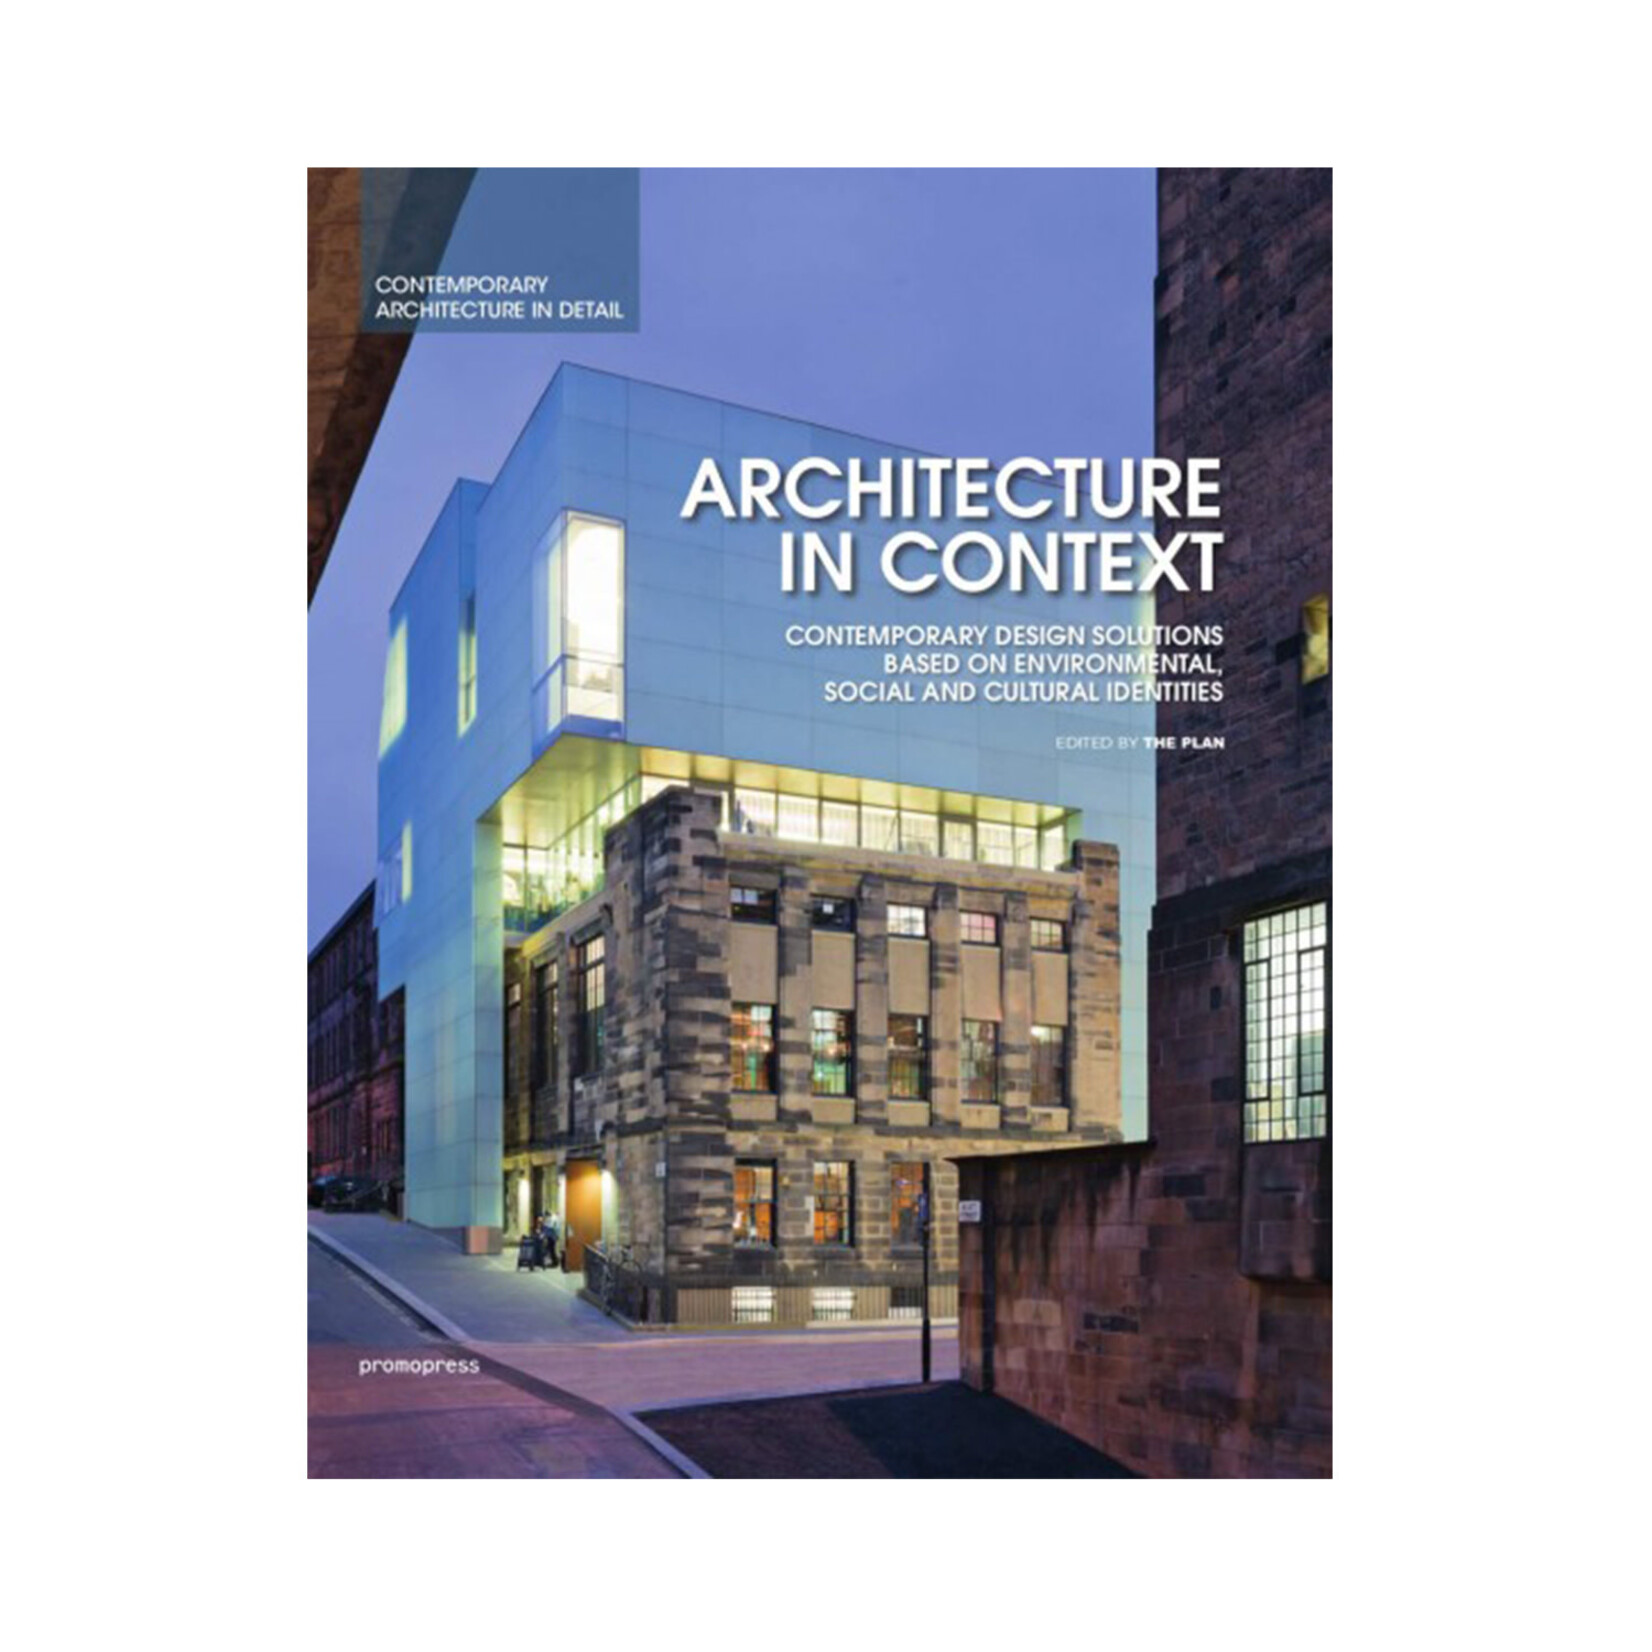 Architecture in Context: Contemporary Design Solutions Based on Environmental, Social and Cultural Identities